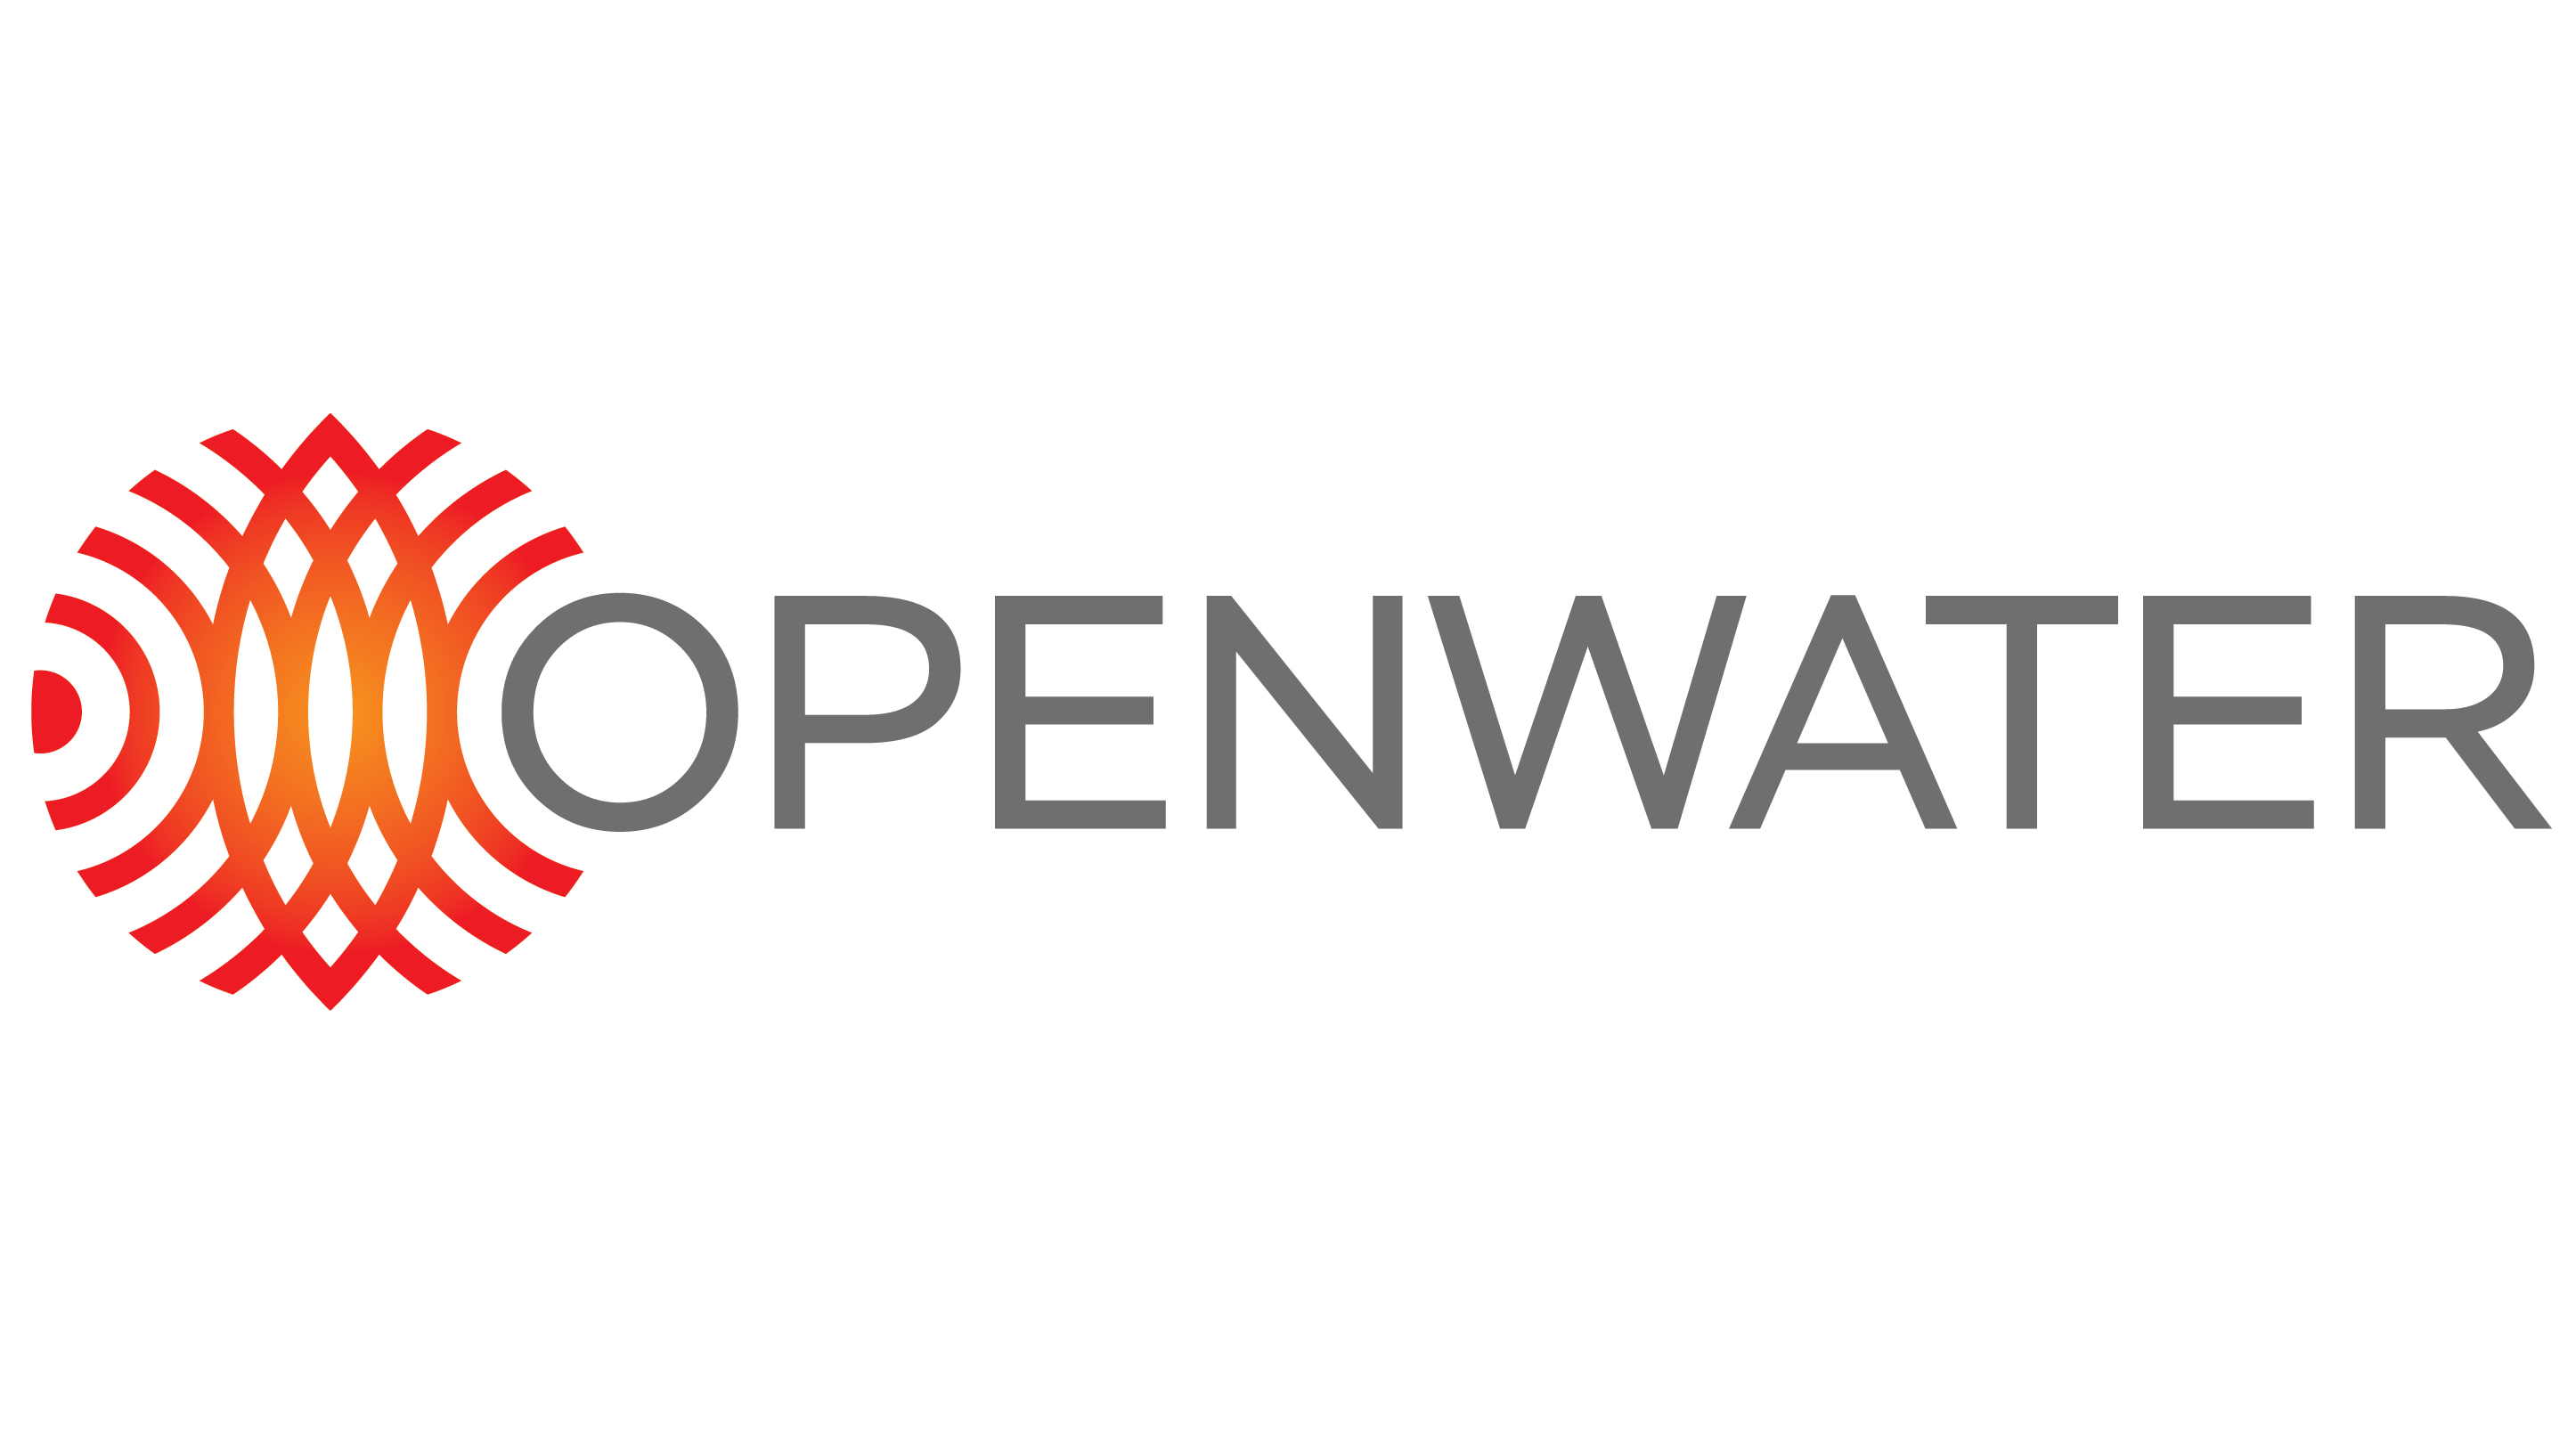 Openwater logo